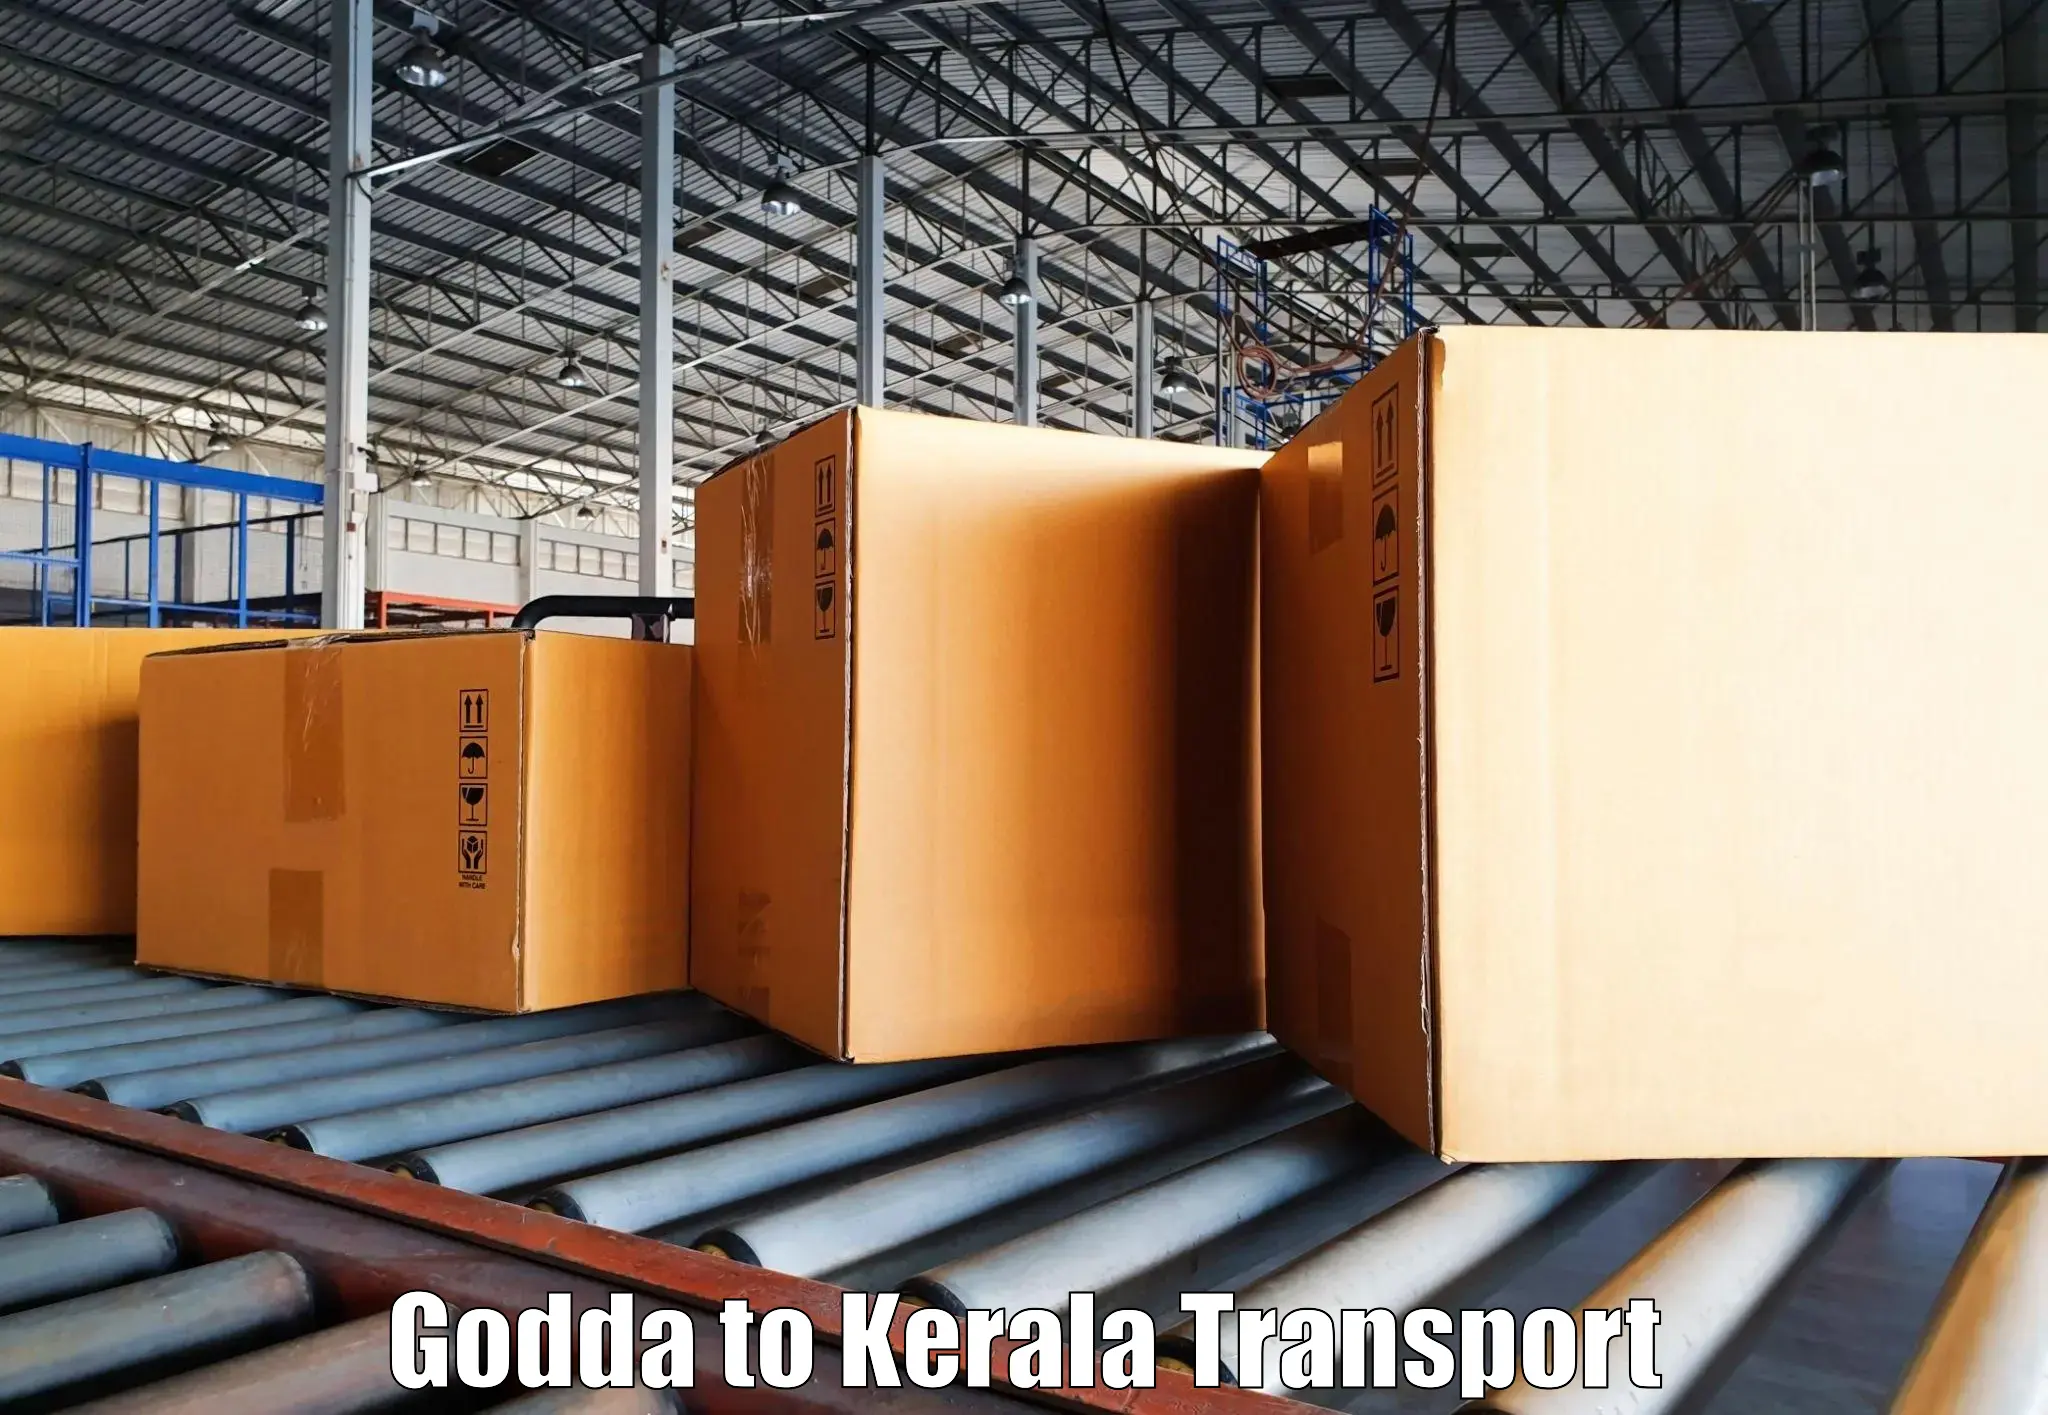 Transport bike from one state to another Godda to Pala